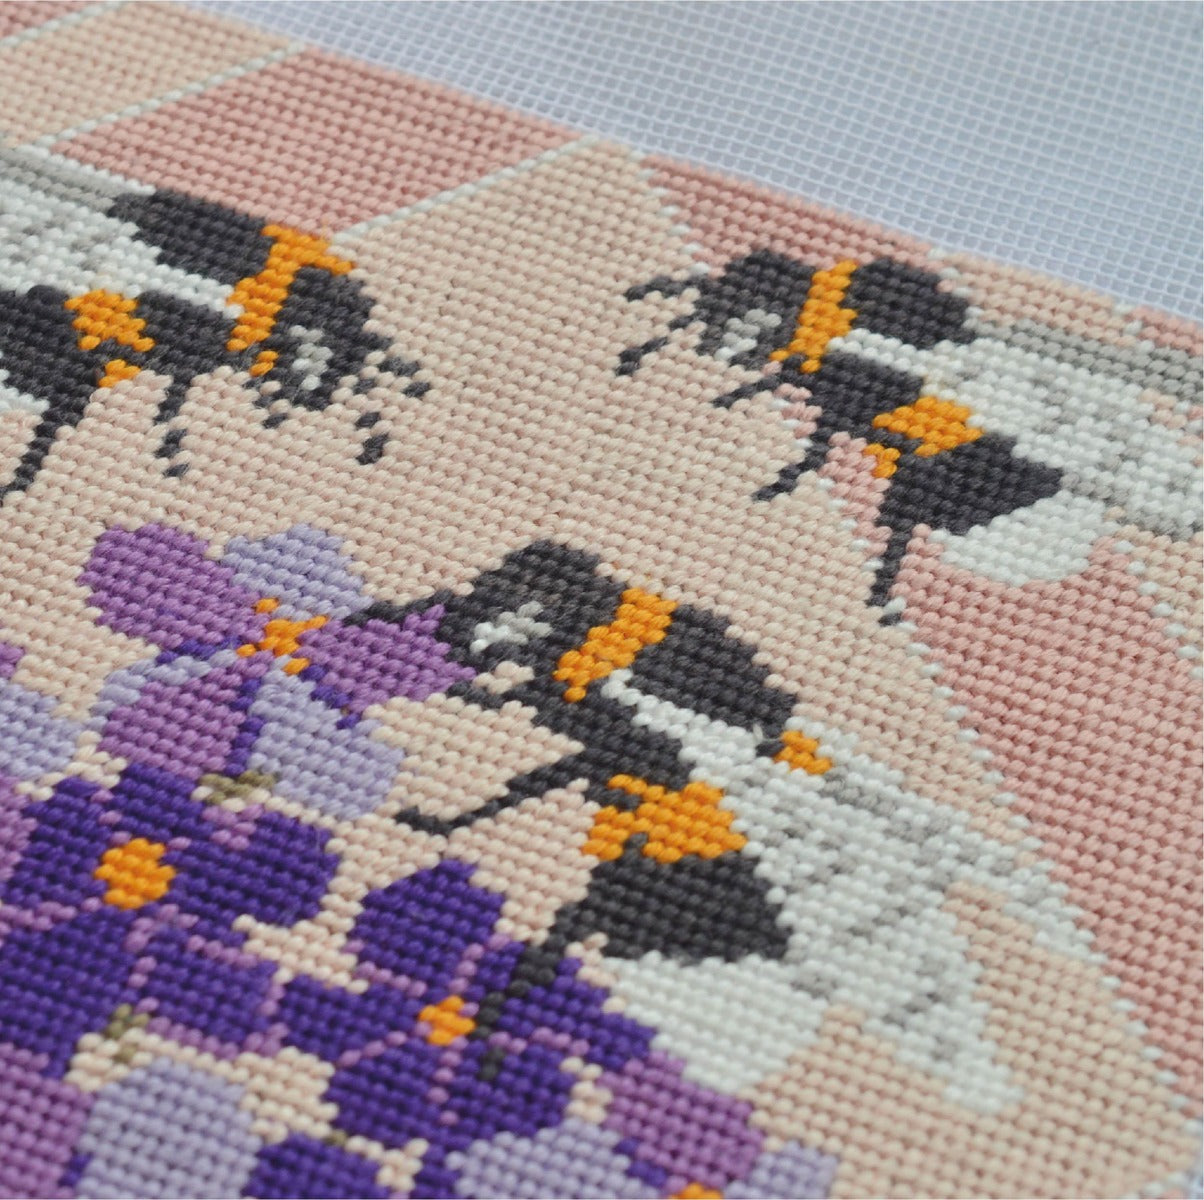 tapestry kit worked in tent stitch using vibrant cotton thread to create beautiful detail